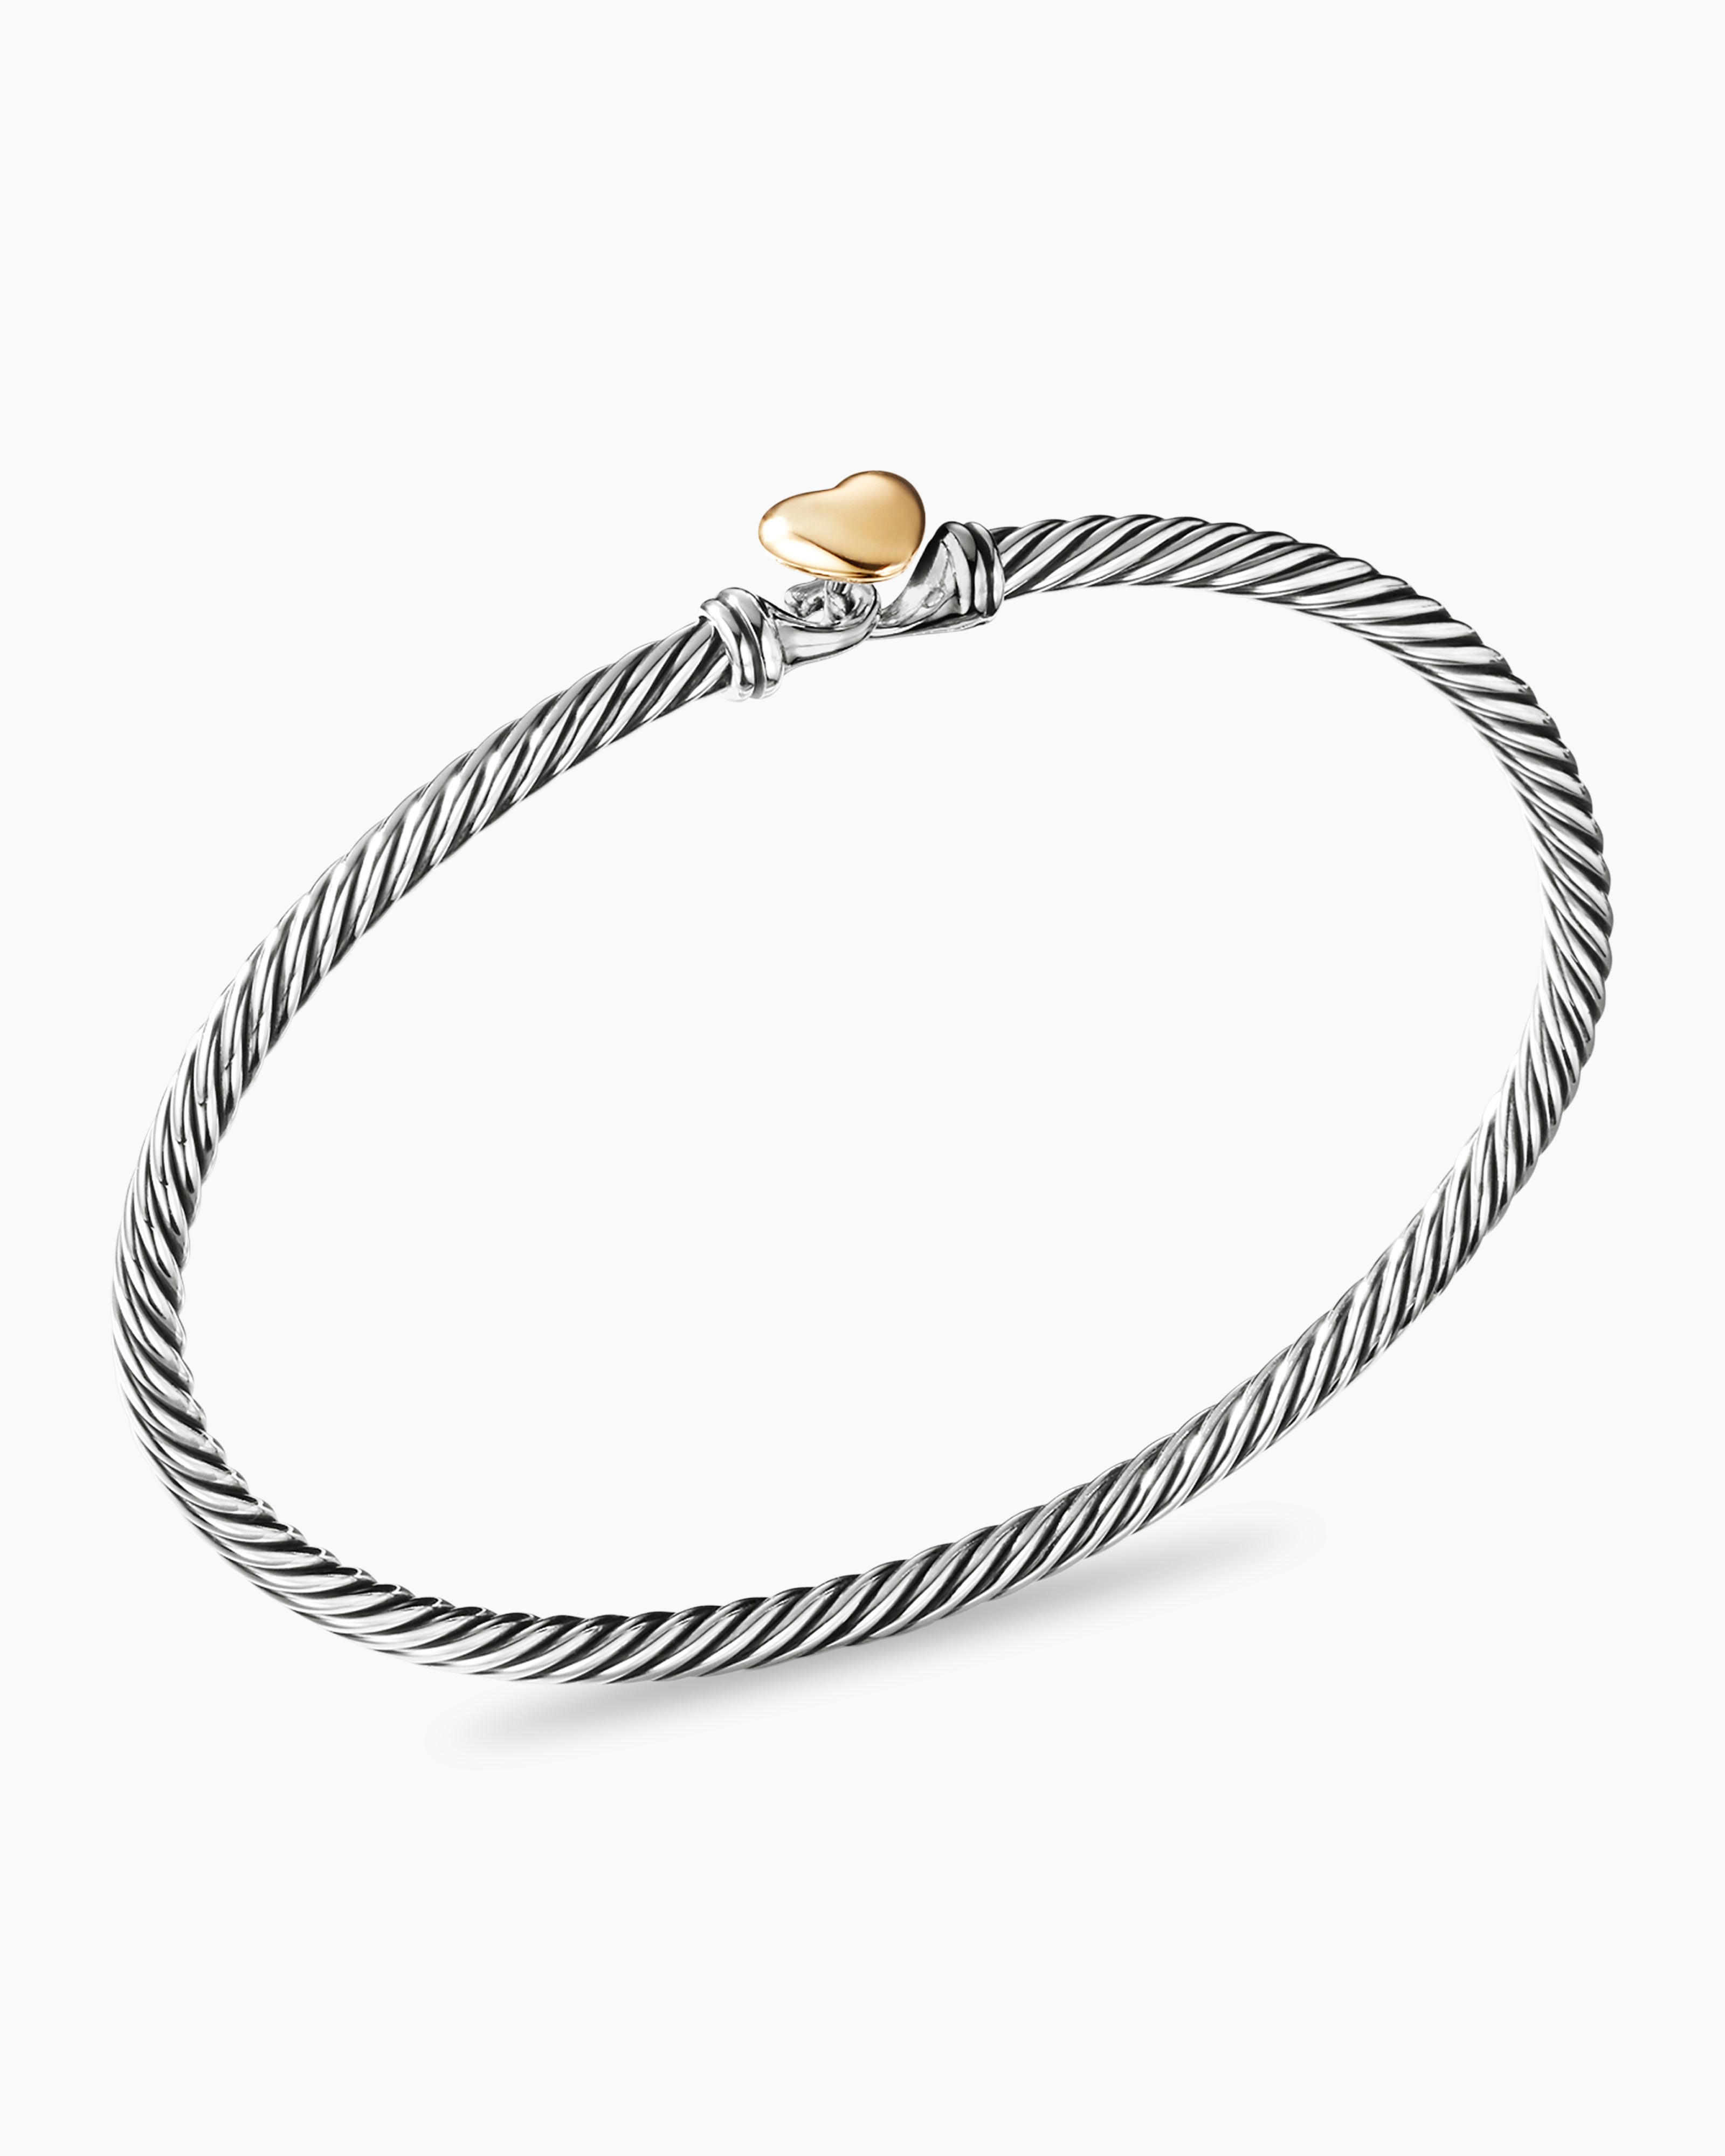 Cable Collectibles Heart Bracelet in Sterling Silver with 18K